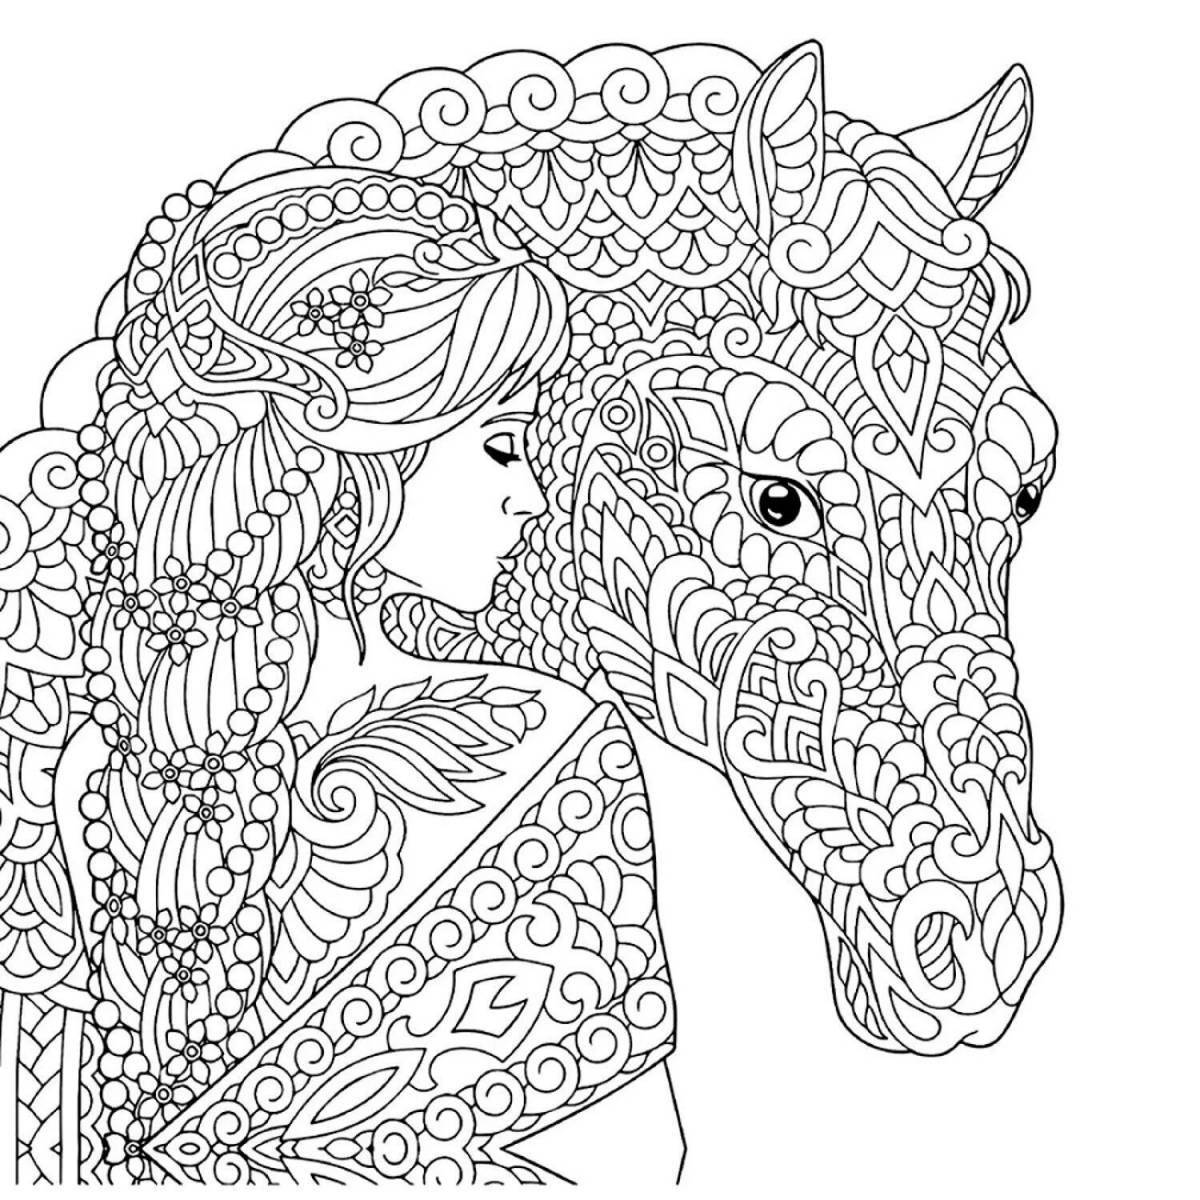 Fun coloring book antistress for girls animals